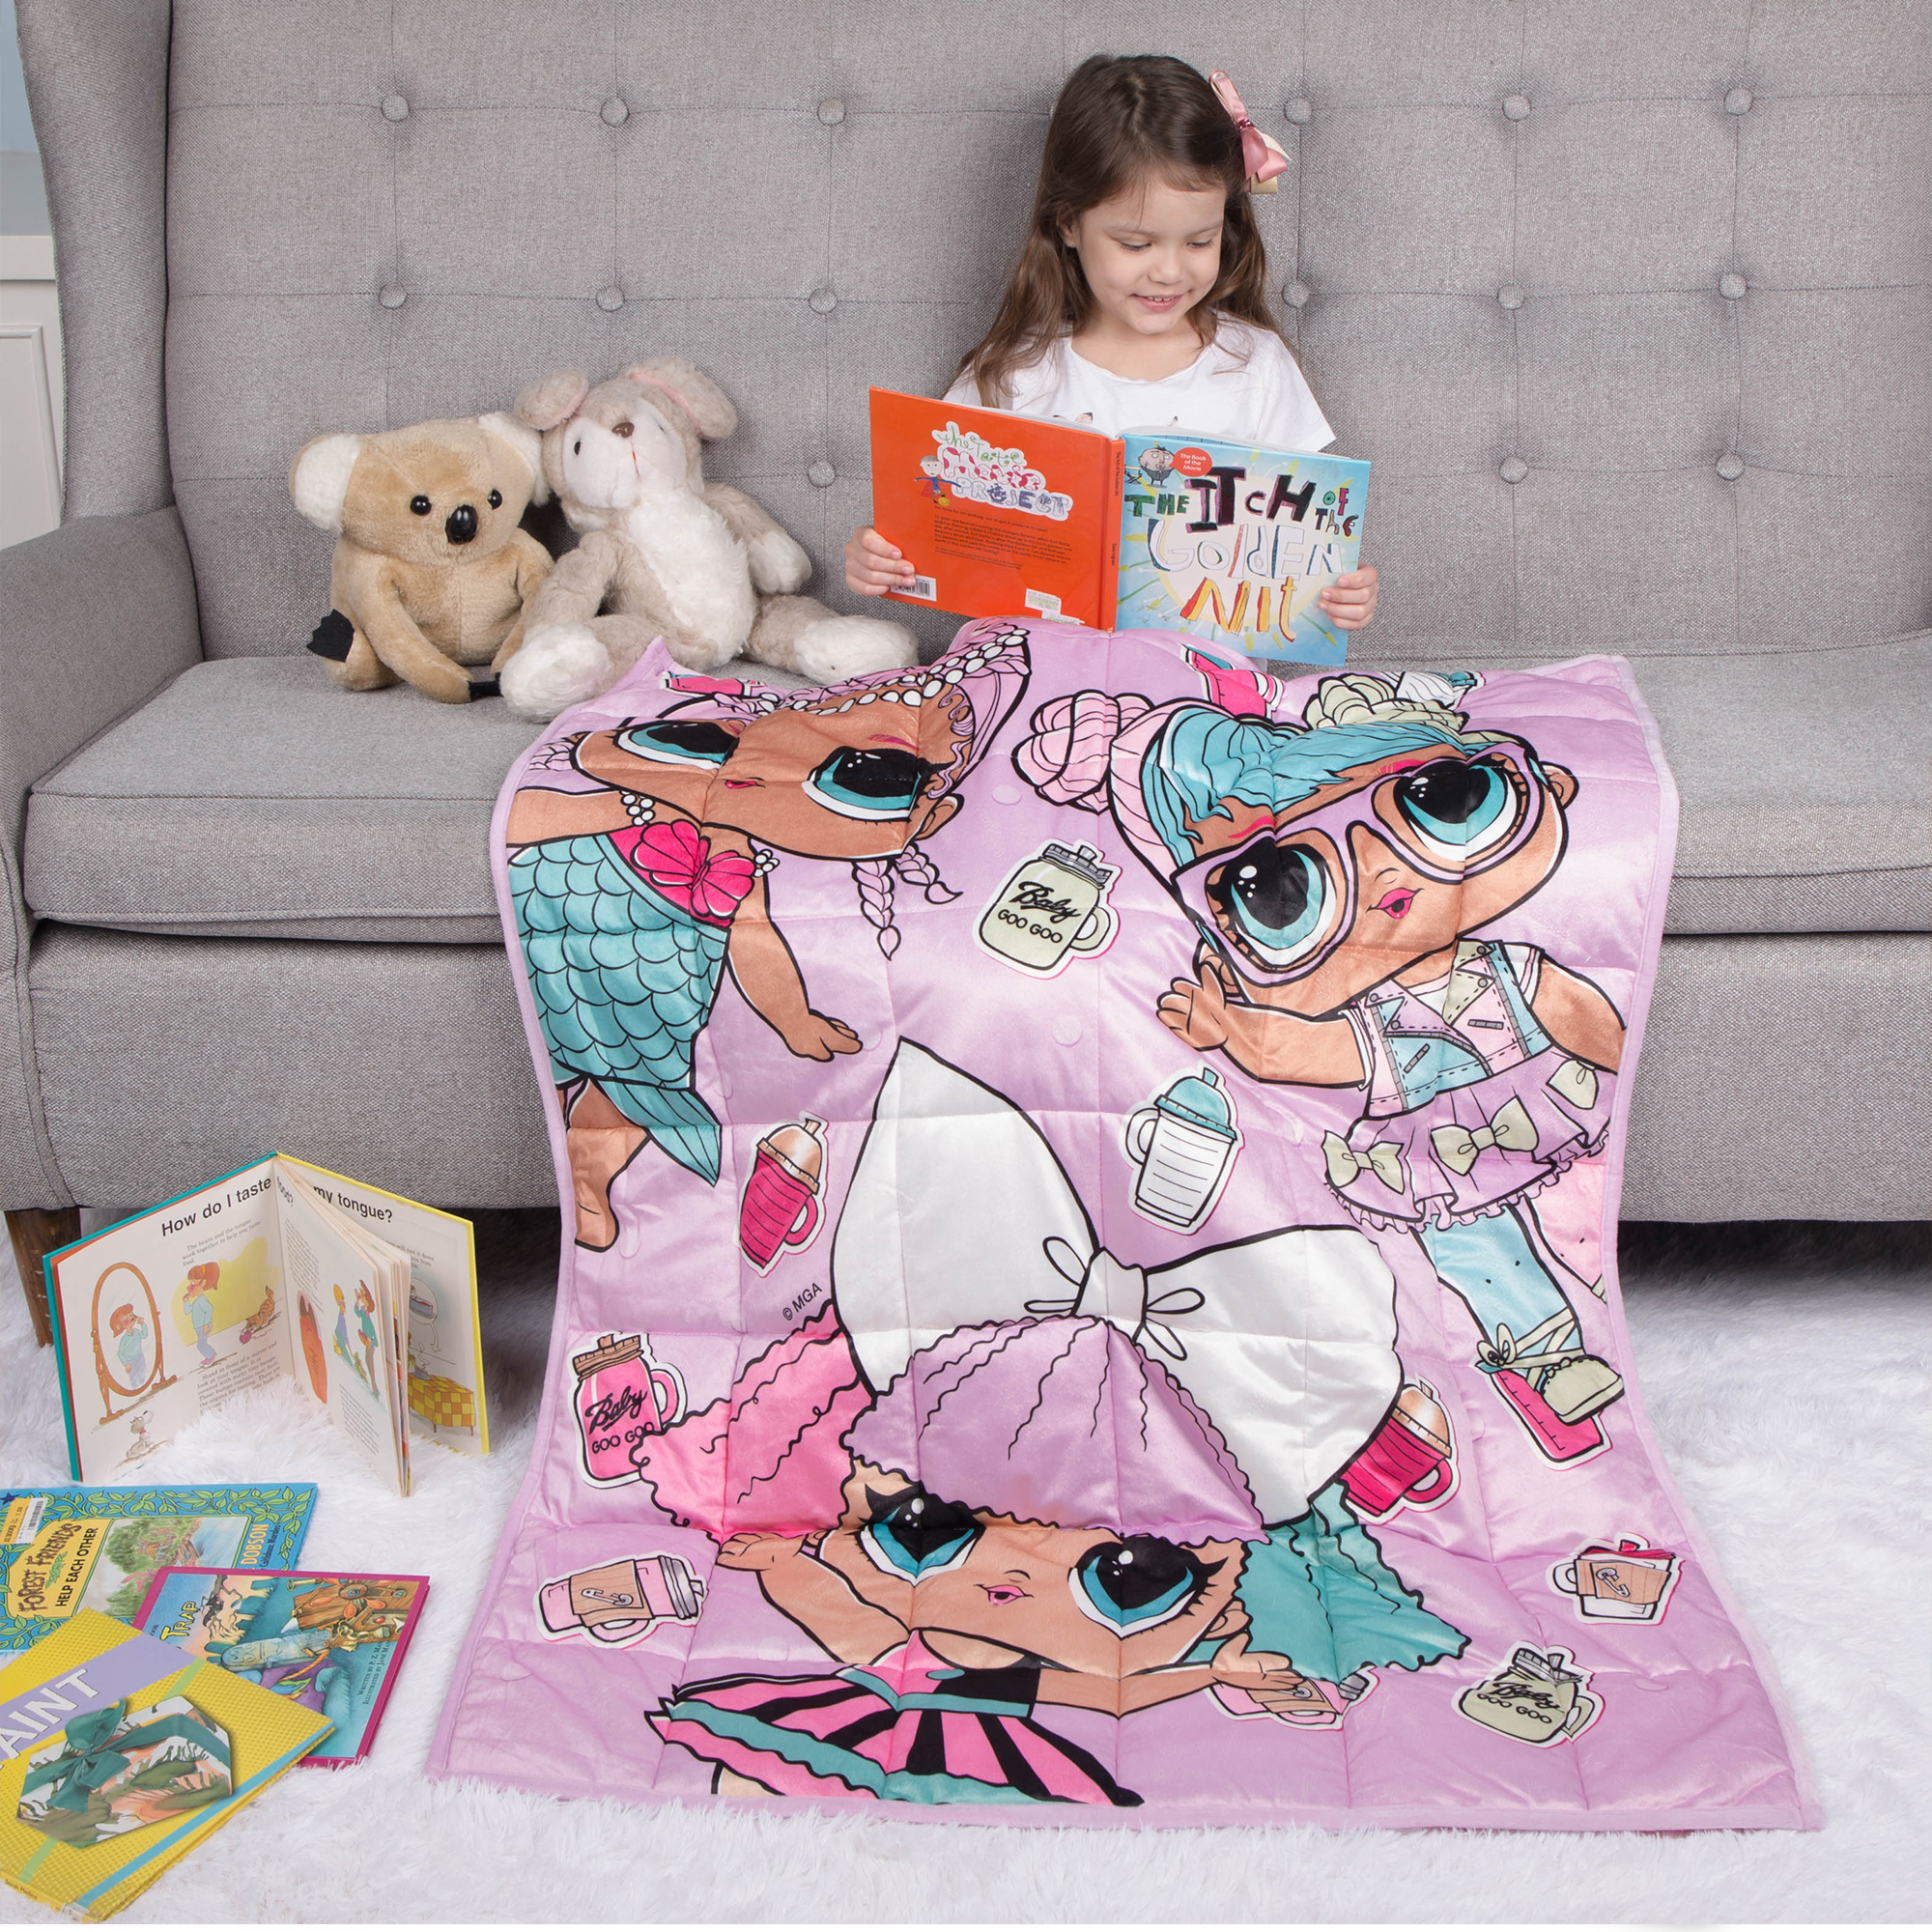 LOL Surprise Frozen Kids Weighted Blanket, 4.5lb, 36 x 48, Pink, MGA - image 3 of 11